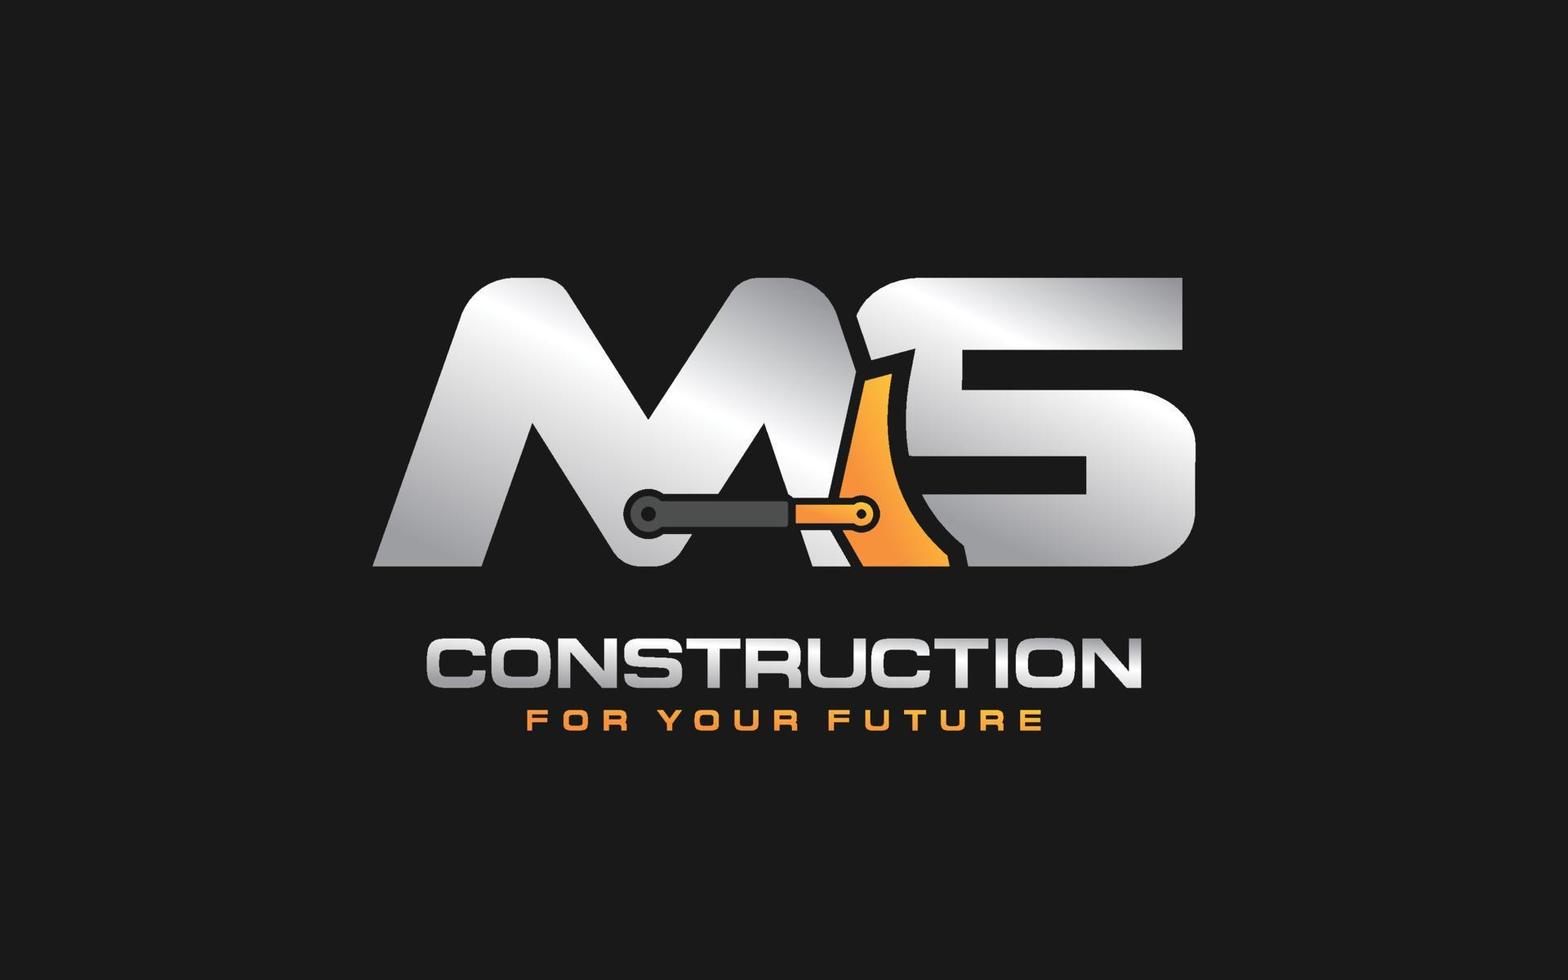 MS logo excavator for construction company. Heavy equipment template vector illustration for your brand.